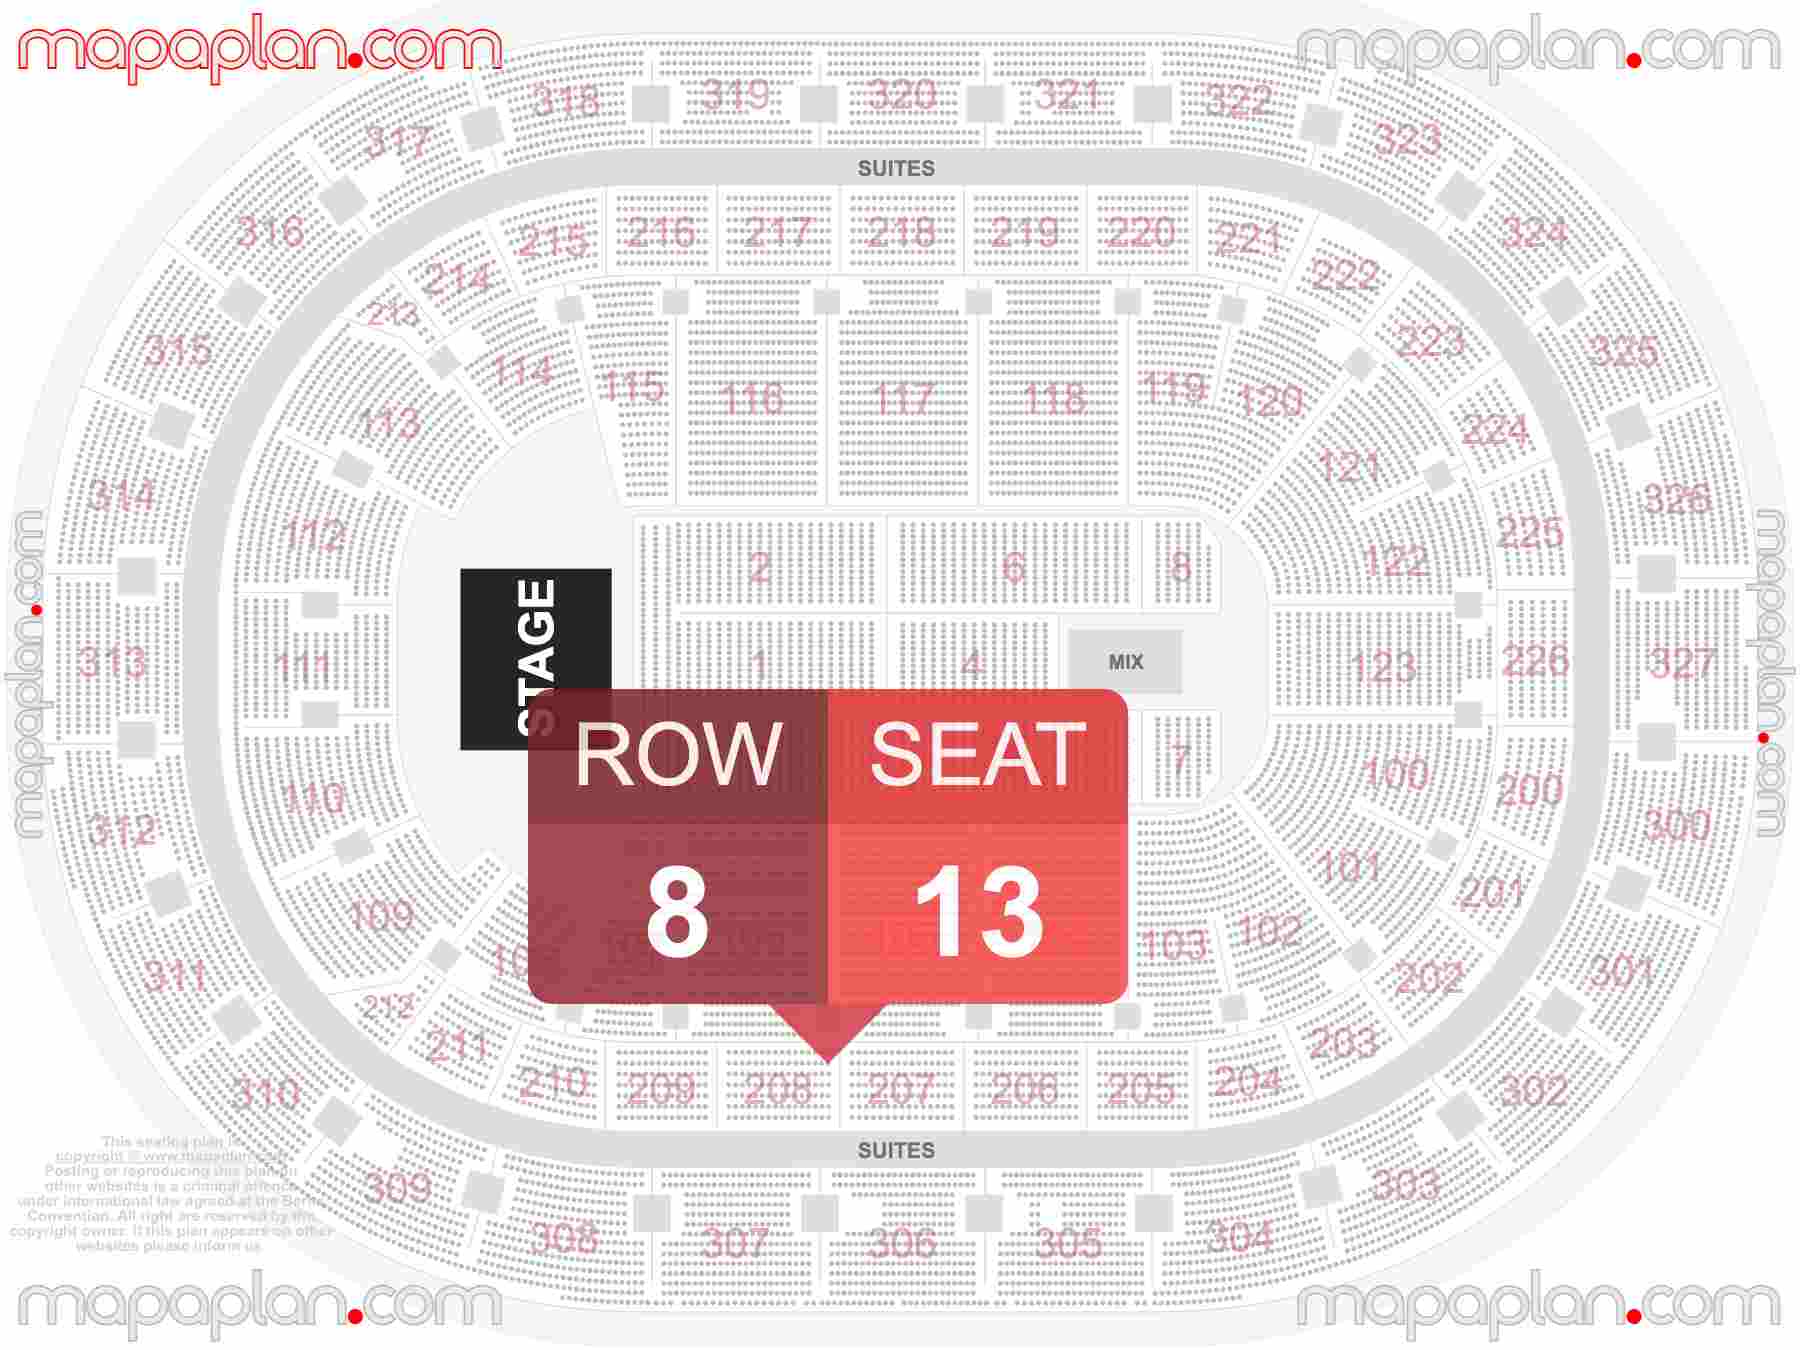 Buffalo KeyBank Center seating chart Concert detailed seat numbers and row numbering chart with interactive map plan layout